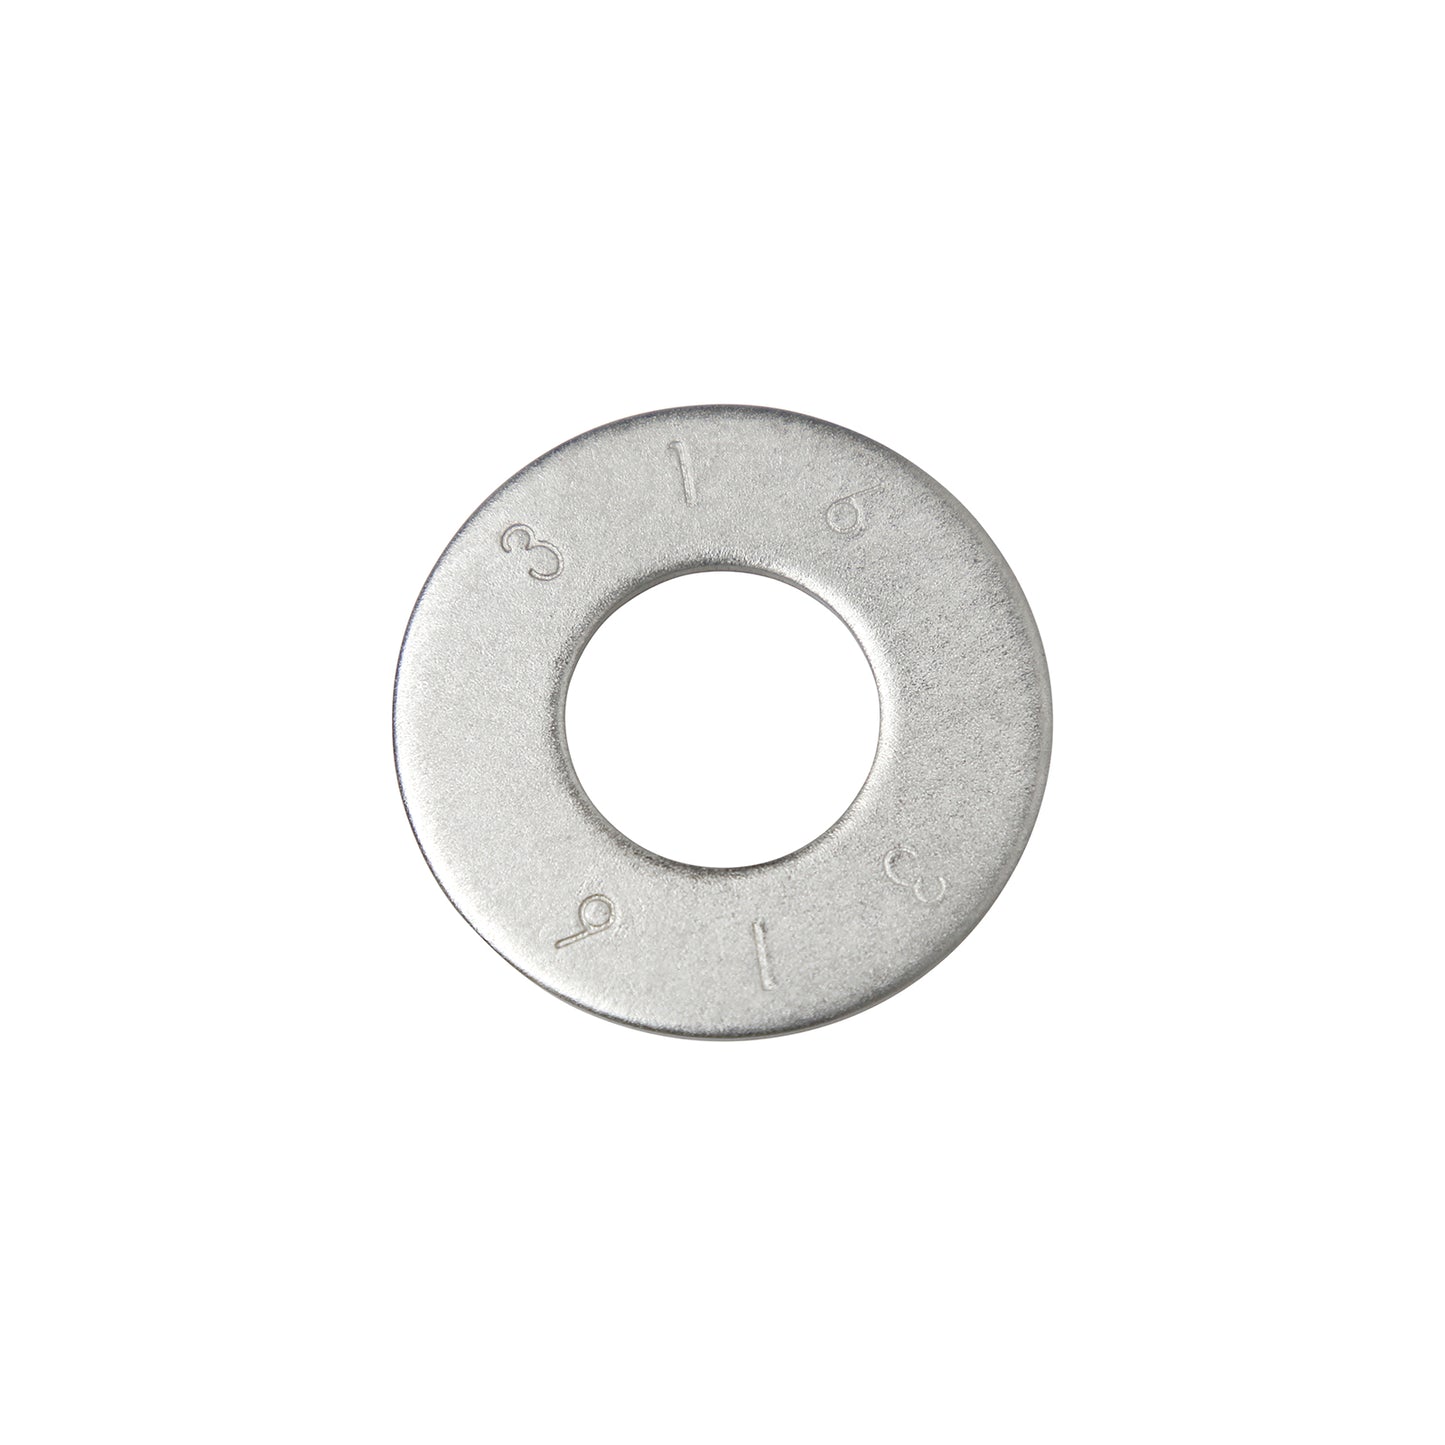 7/8" Conquest USS Flat Washer - 316 Stainless Steel